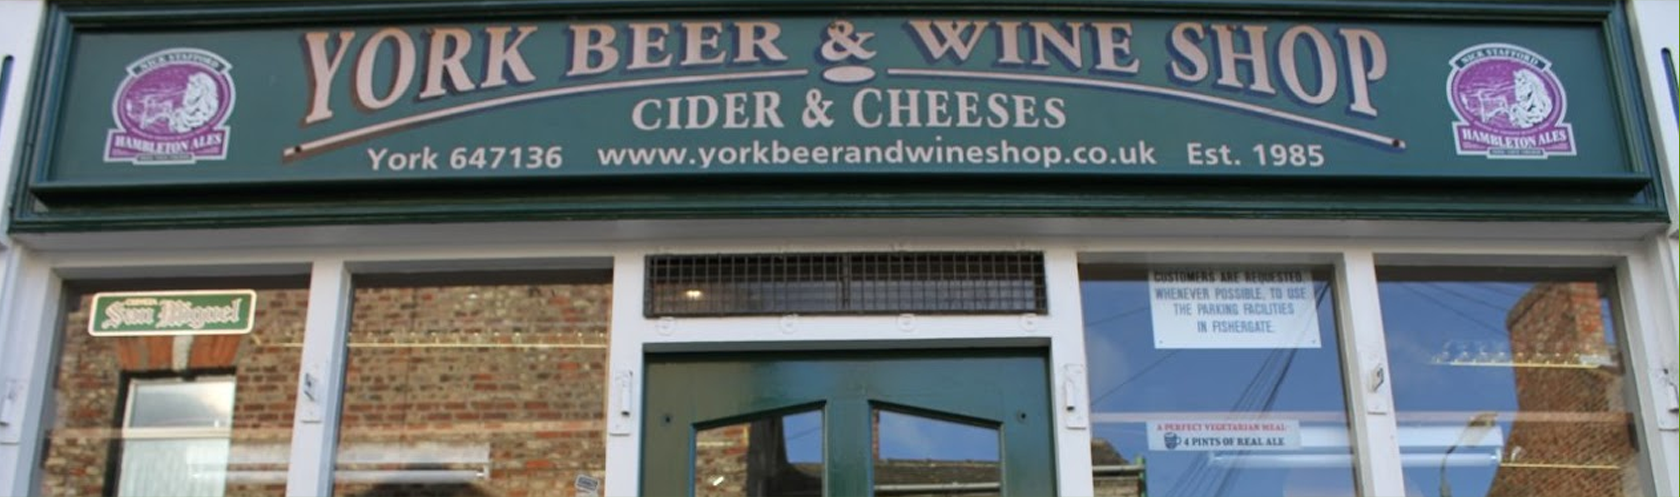 york-beer-and-wine-shop